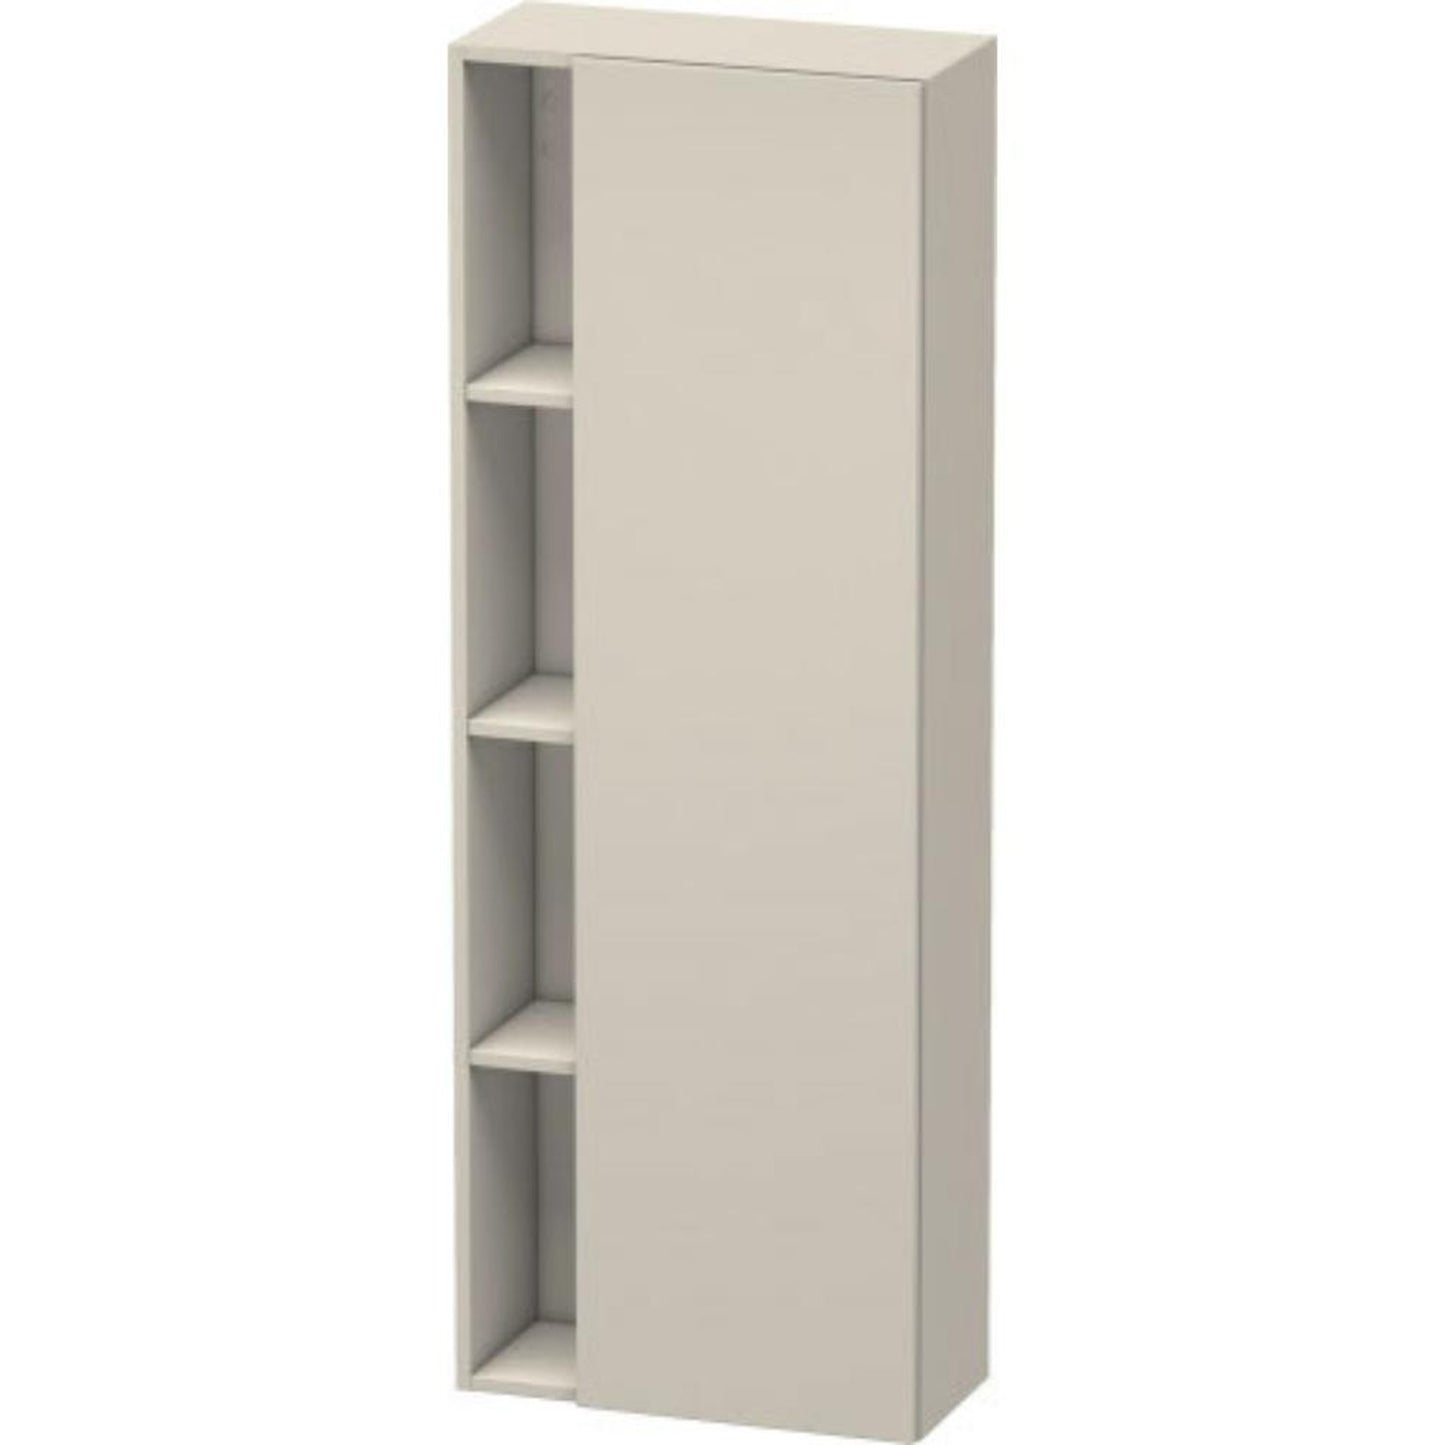 Duravit DuraStyle 20" x 55" x 9" Tall Cabinet With Right Hinge One Door in Taupe (DS1238R9191)